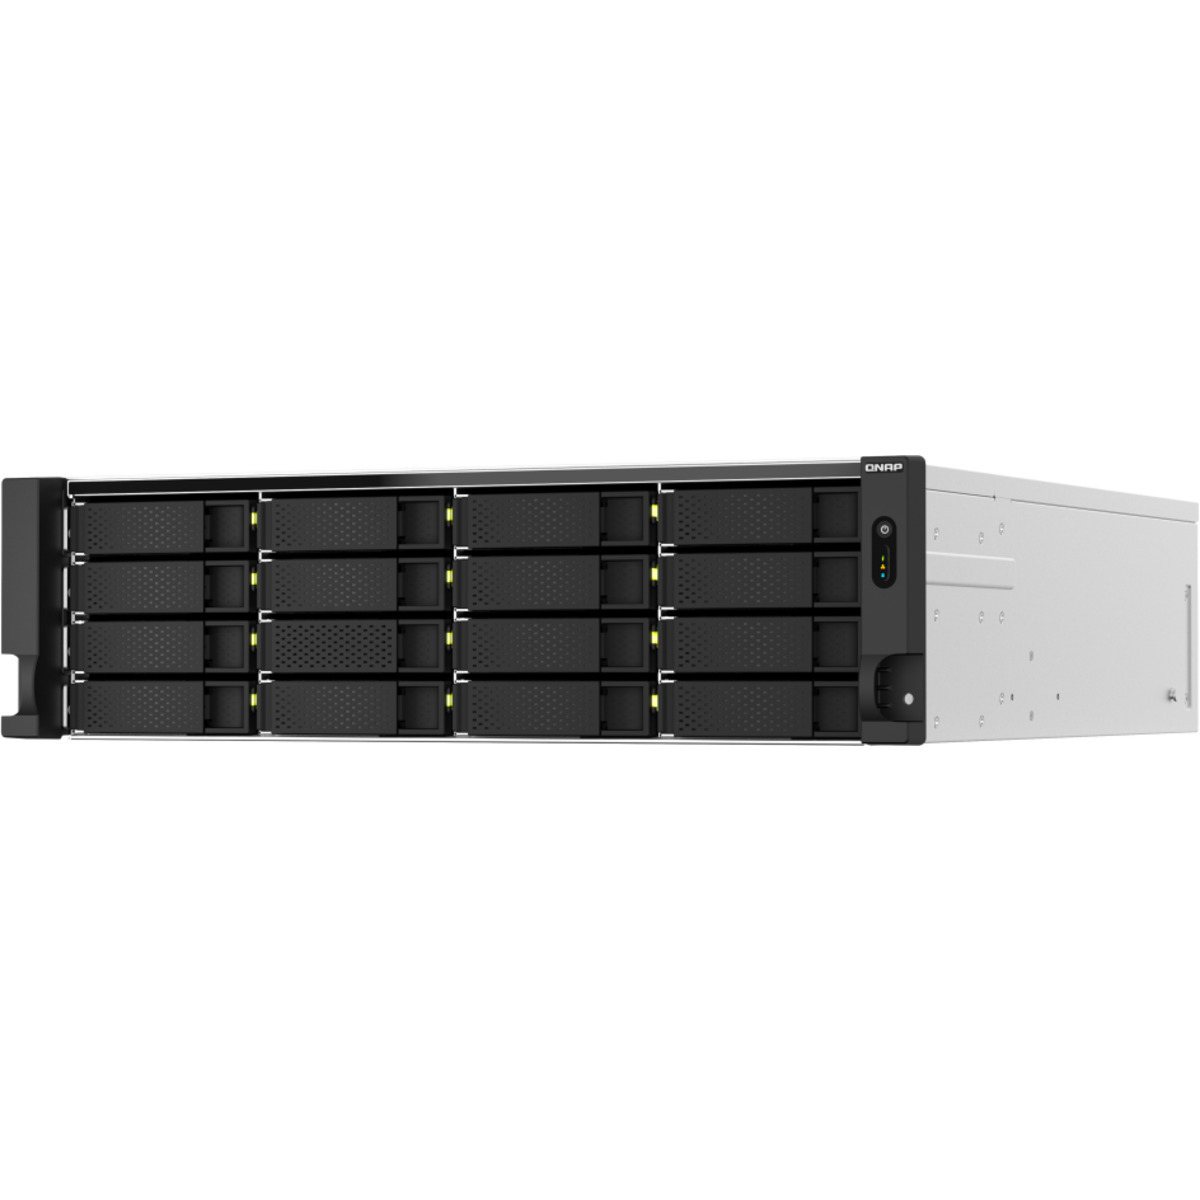 QNAP TS-h2287XU-RP E-2378 QuTS hero Edition 96tb 16+6-Bay RackMount Large Business / Enterprise NAS - Network Attached Storage Device 16x6tb Seagate IronWolf Pro ST6000NT001 3.5 7200rpm SATA 6Gb/s HDD NAS Class Drives Installed - Burn-In Tested TS-h2287XU-RP E-2378 QuTS hero Edition